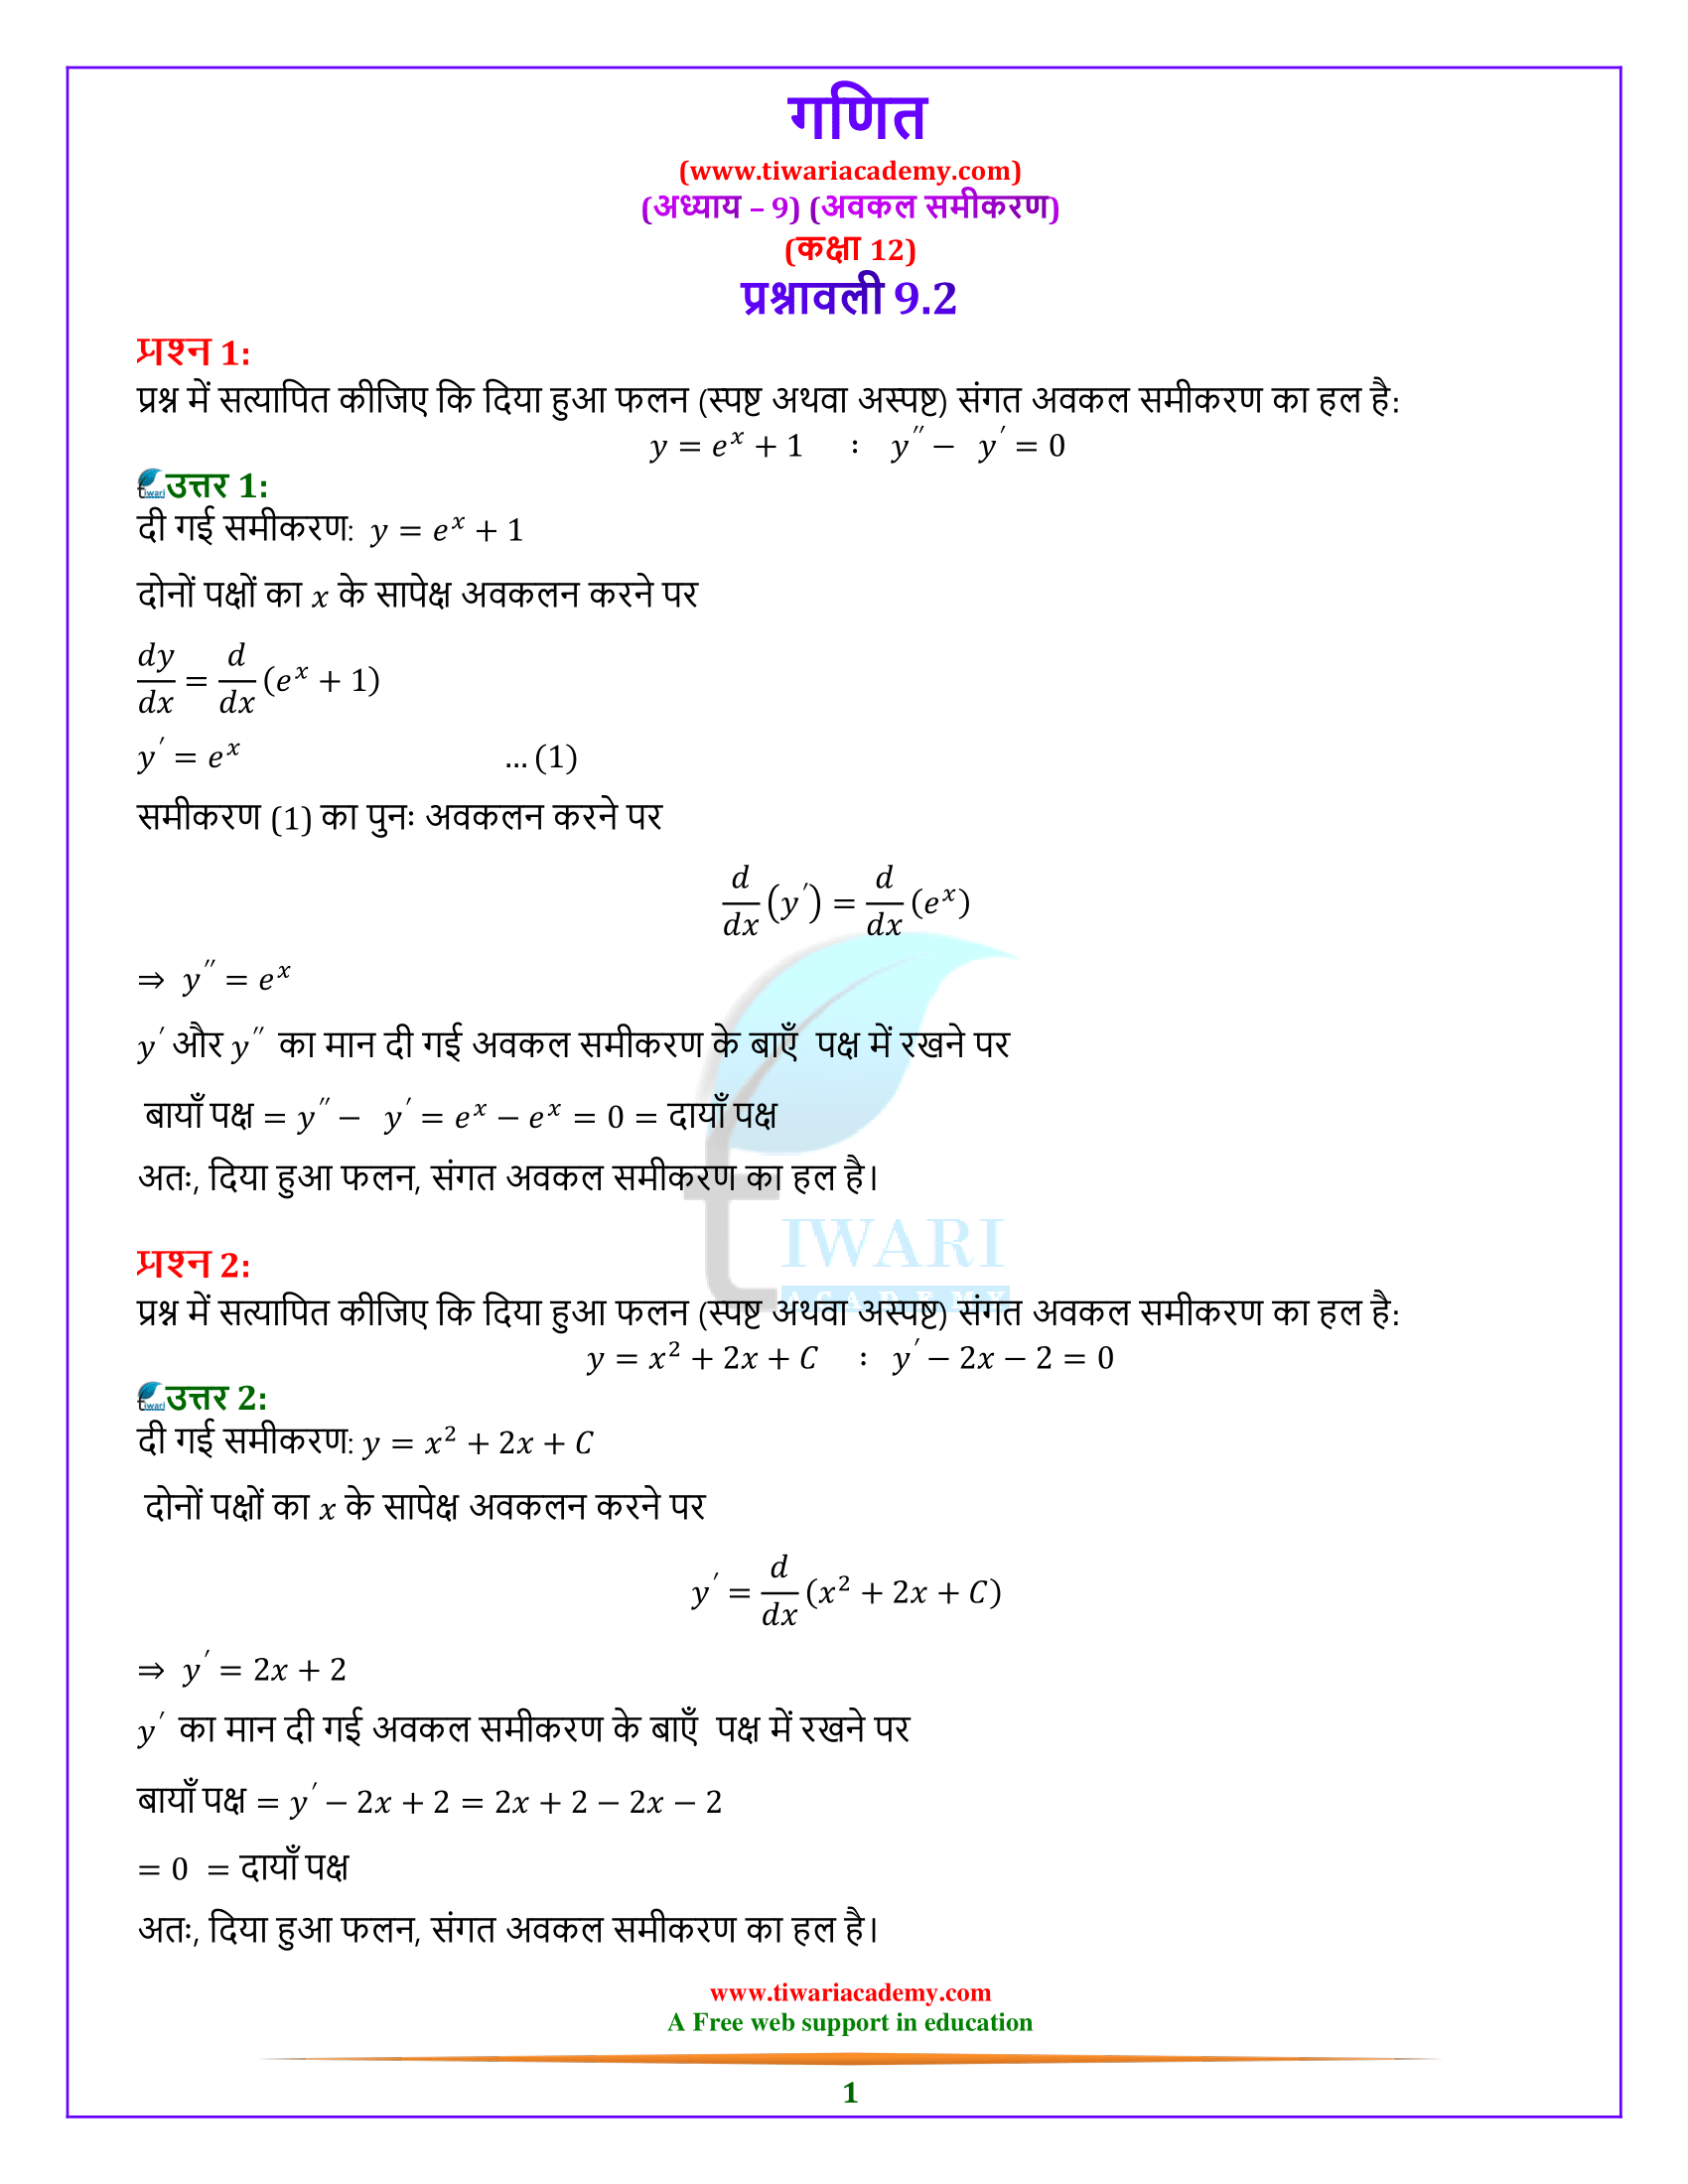 Class 12 Maths Exercise 9.2 Solutions in Hindi Medium